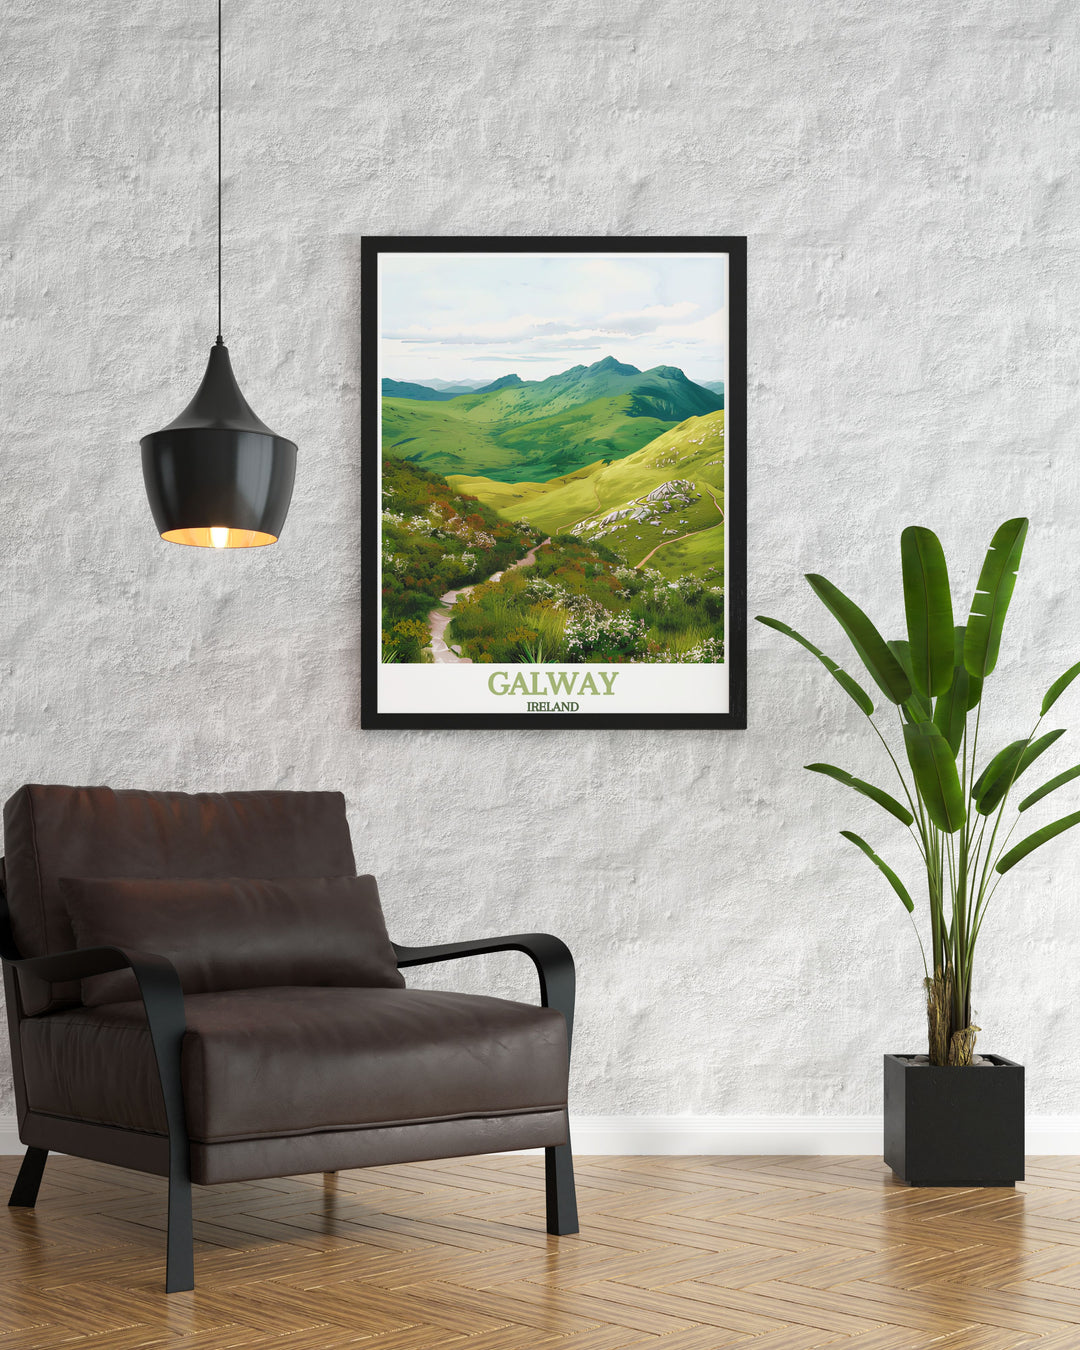 Framed art capturing the wild beauty of Diamond Hill, reflecting the serene and rugged landscapes of Connemara.